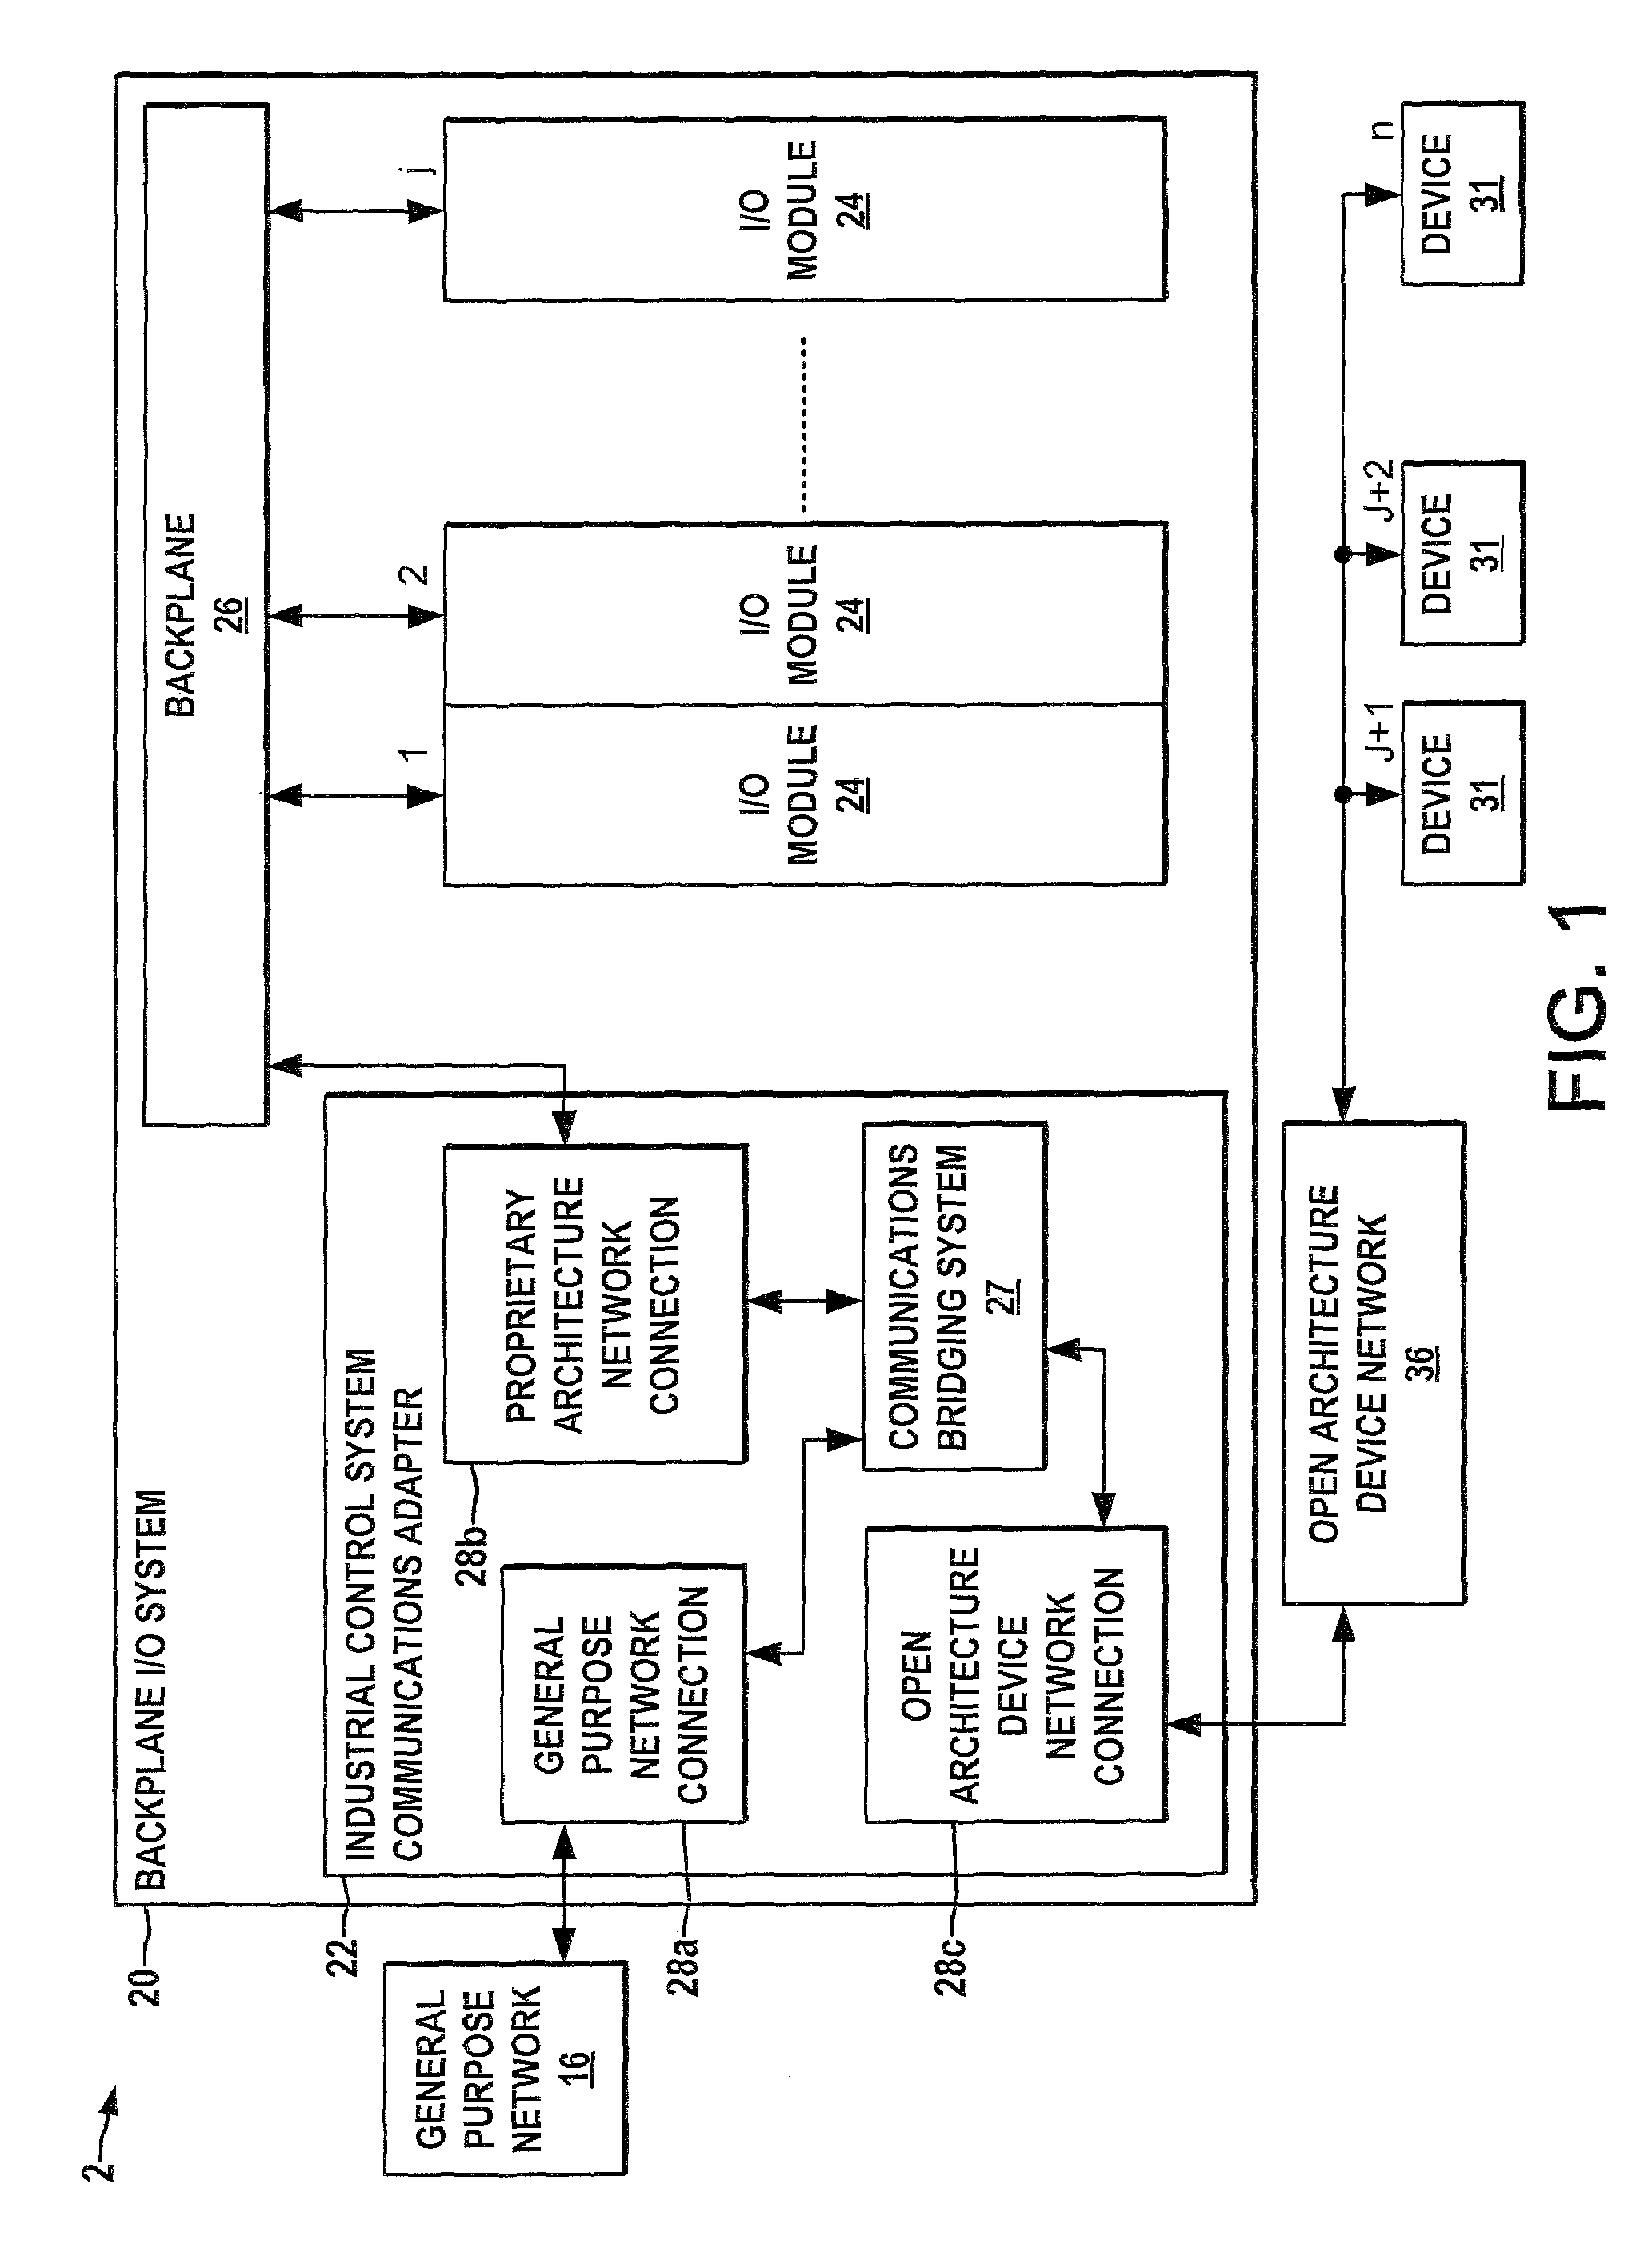 Industrial ethernet communications adapter